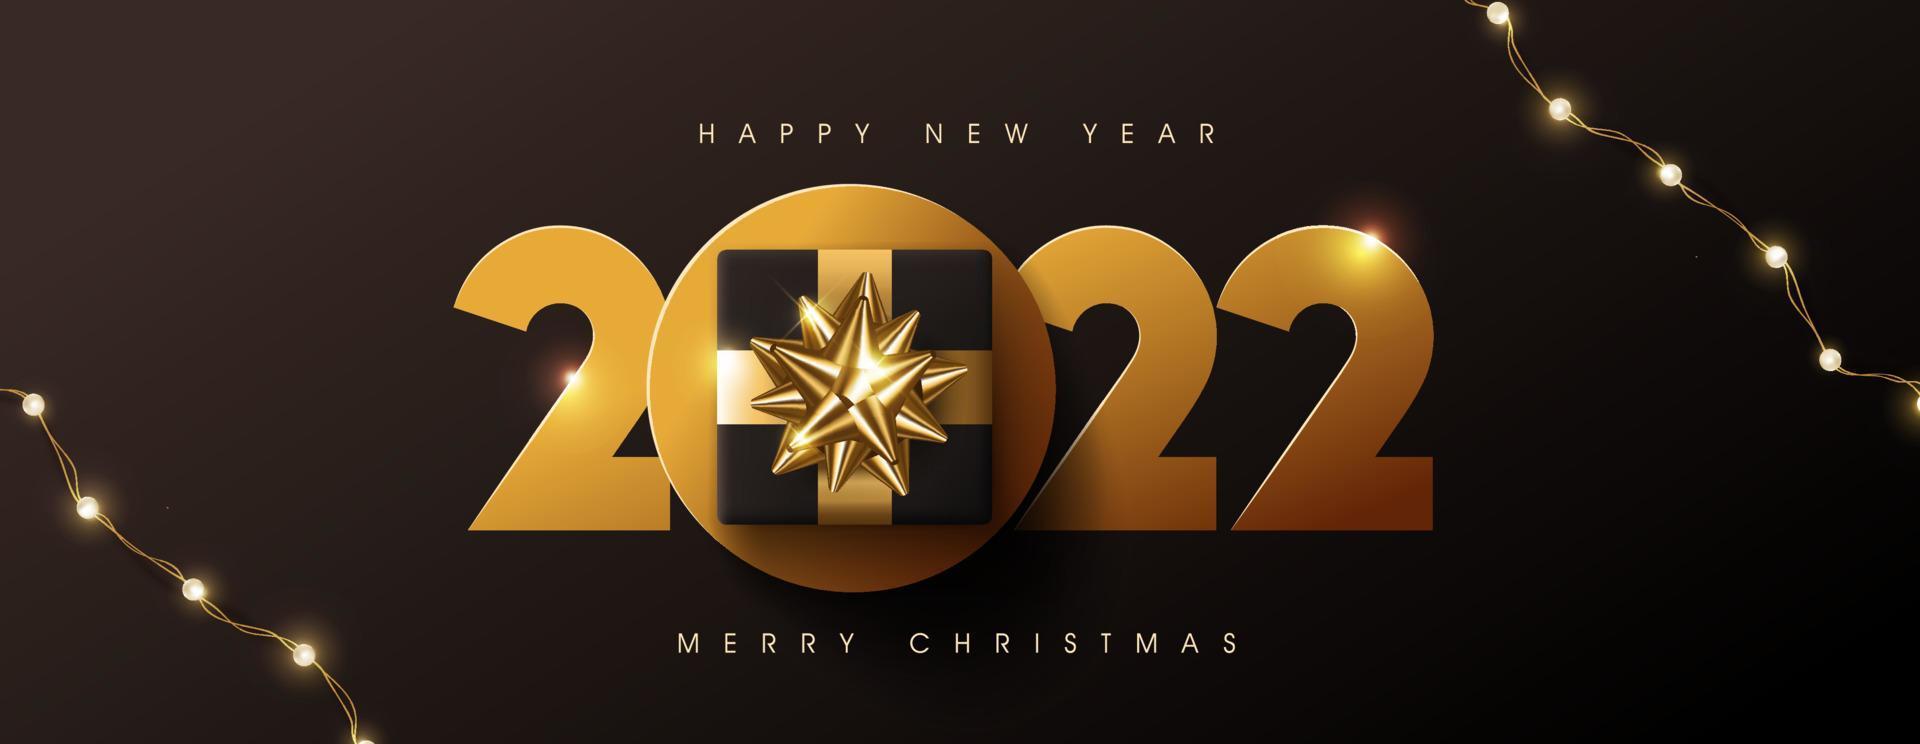 Merry christmas and happy new year 2022 text design Decorated with gift box vector